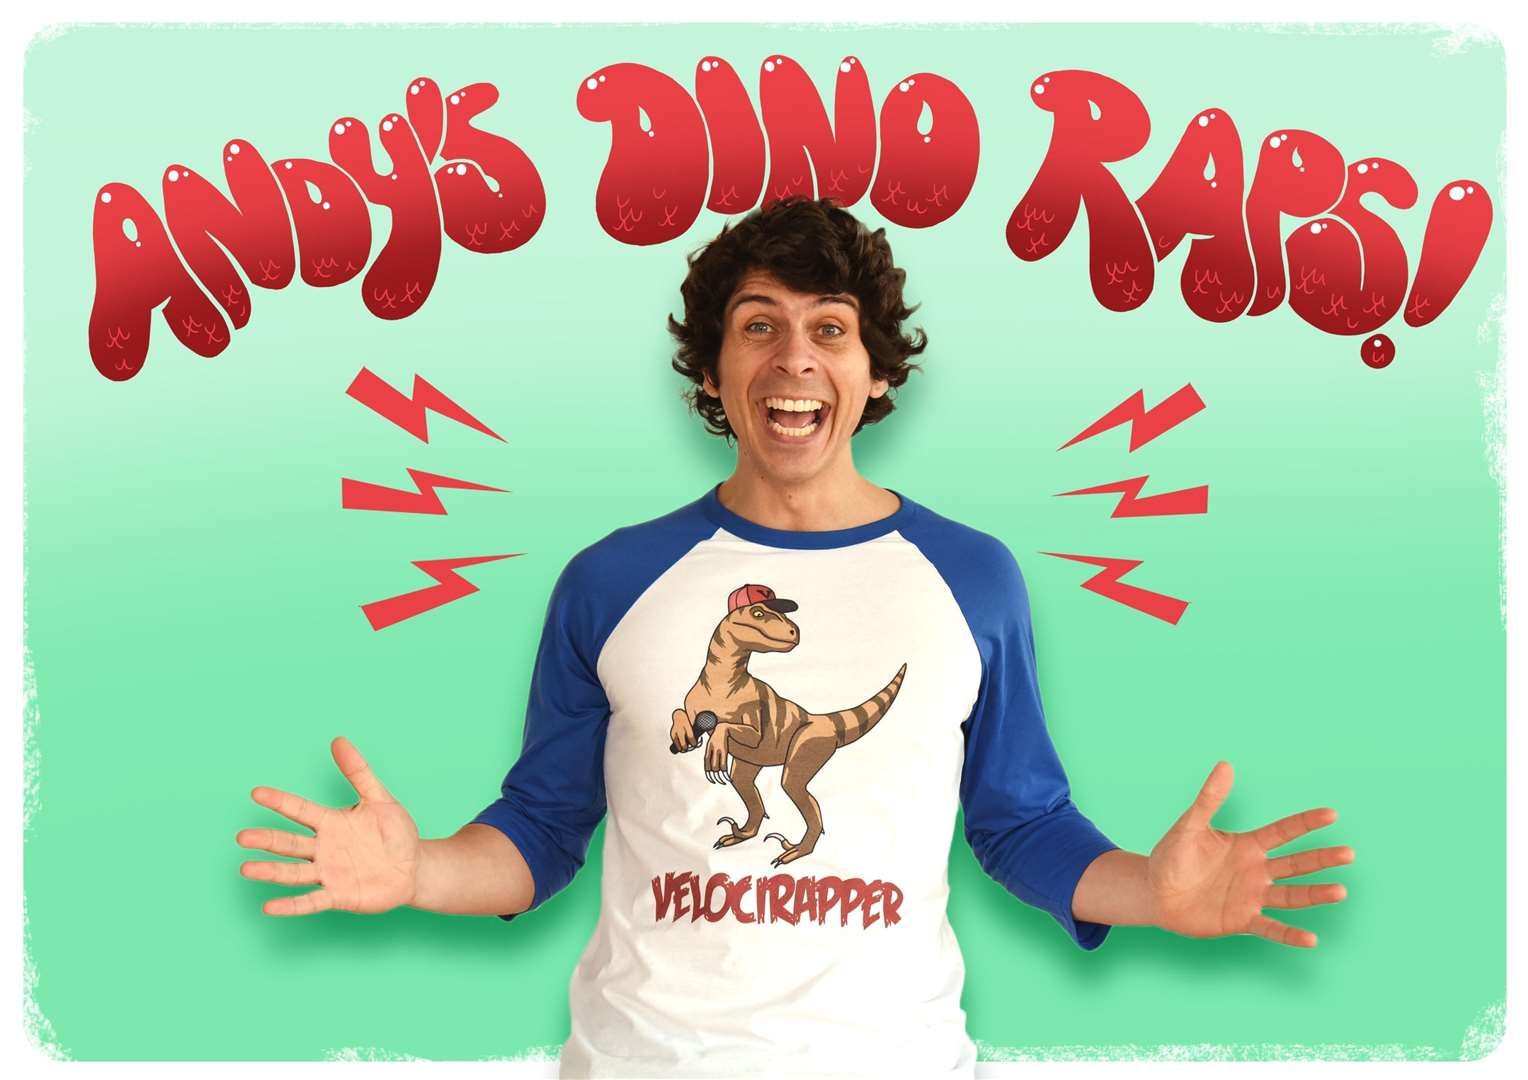 Children's TV star Andy Day will be at Howletts